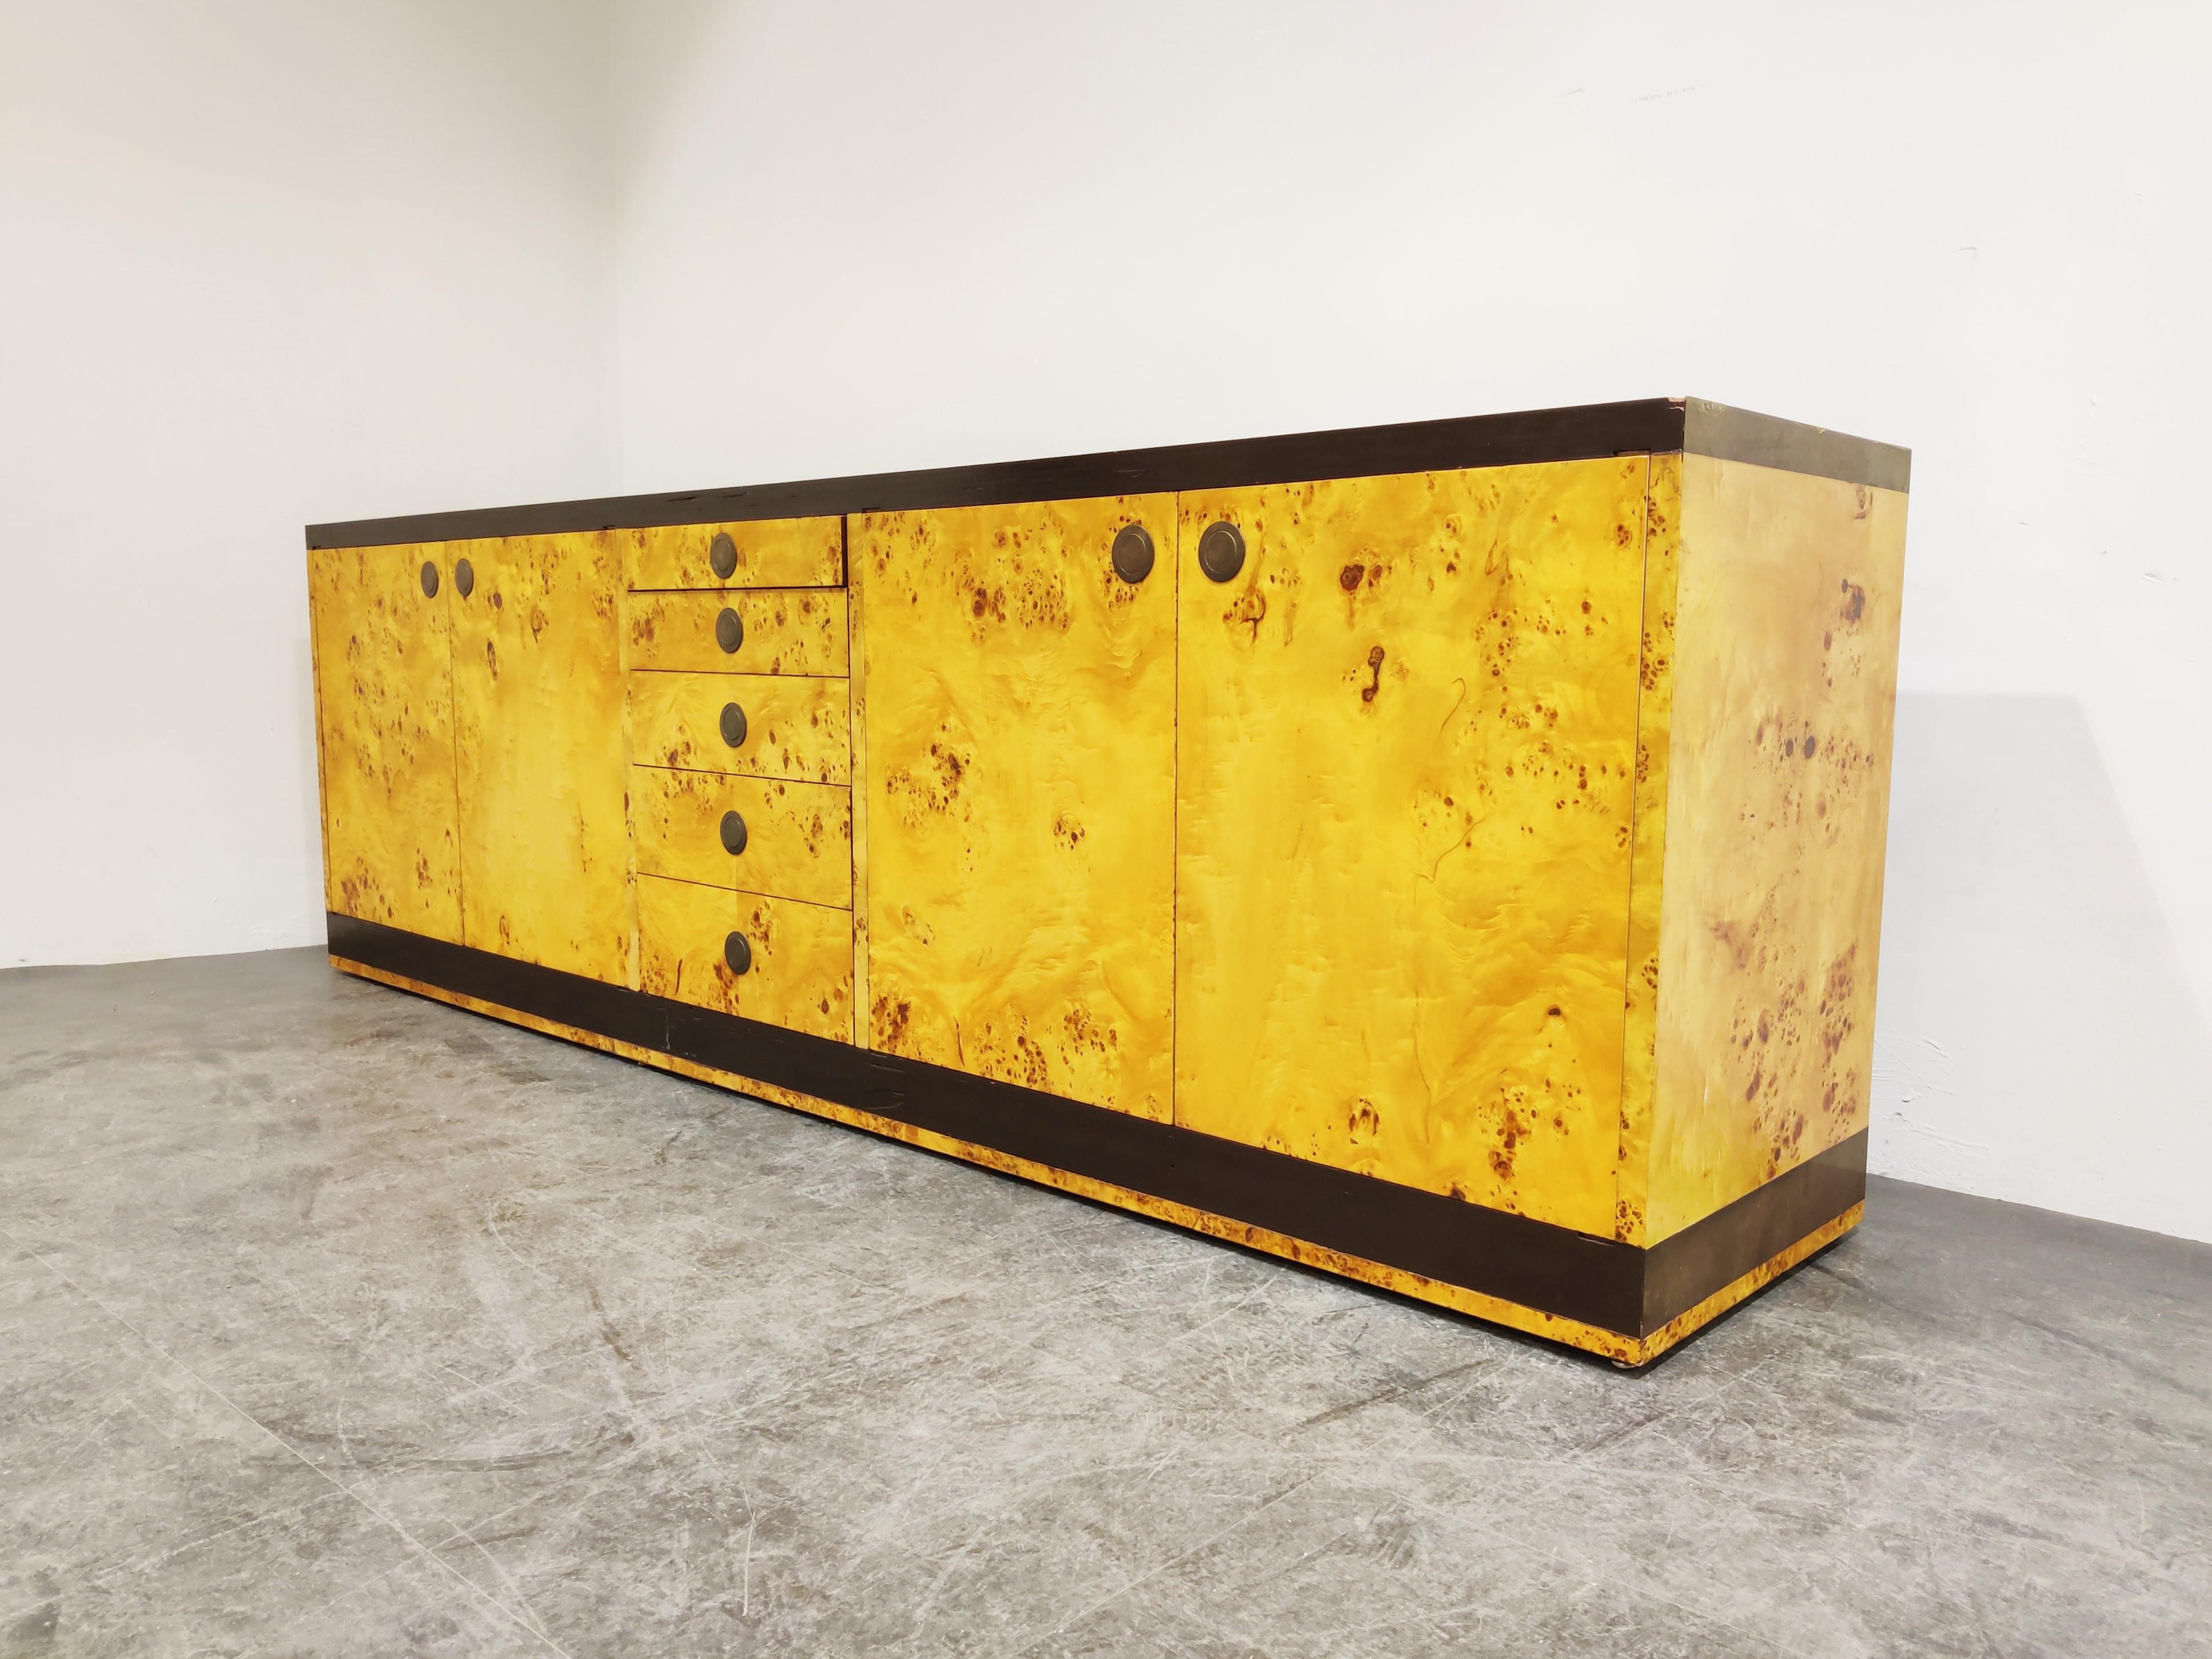 Very rare burled walnut veneer credenza designed by luxury/glamour furniture designer Willy Rizzo.

It features 4 doors and 5 central drawers.

The credenza is made of high quality materials and has a great 1970s-1980s glamourous look.

It